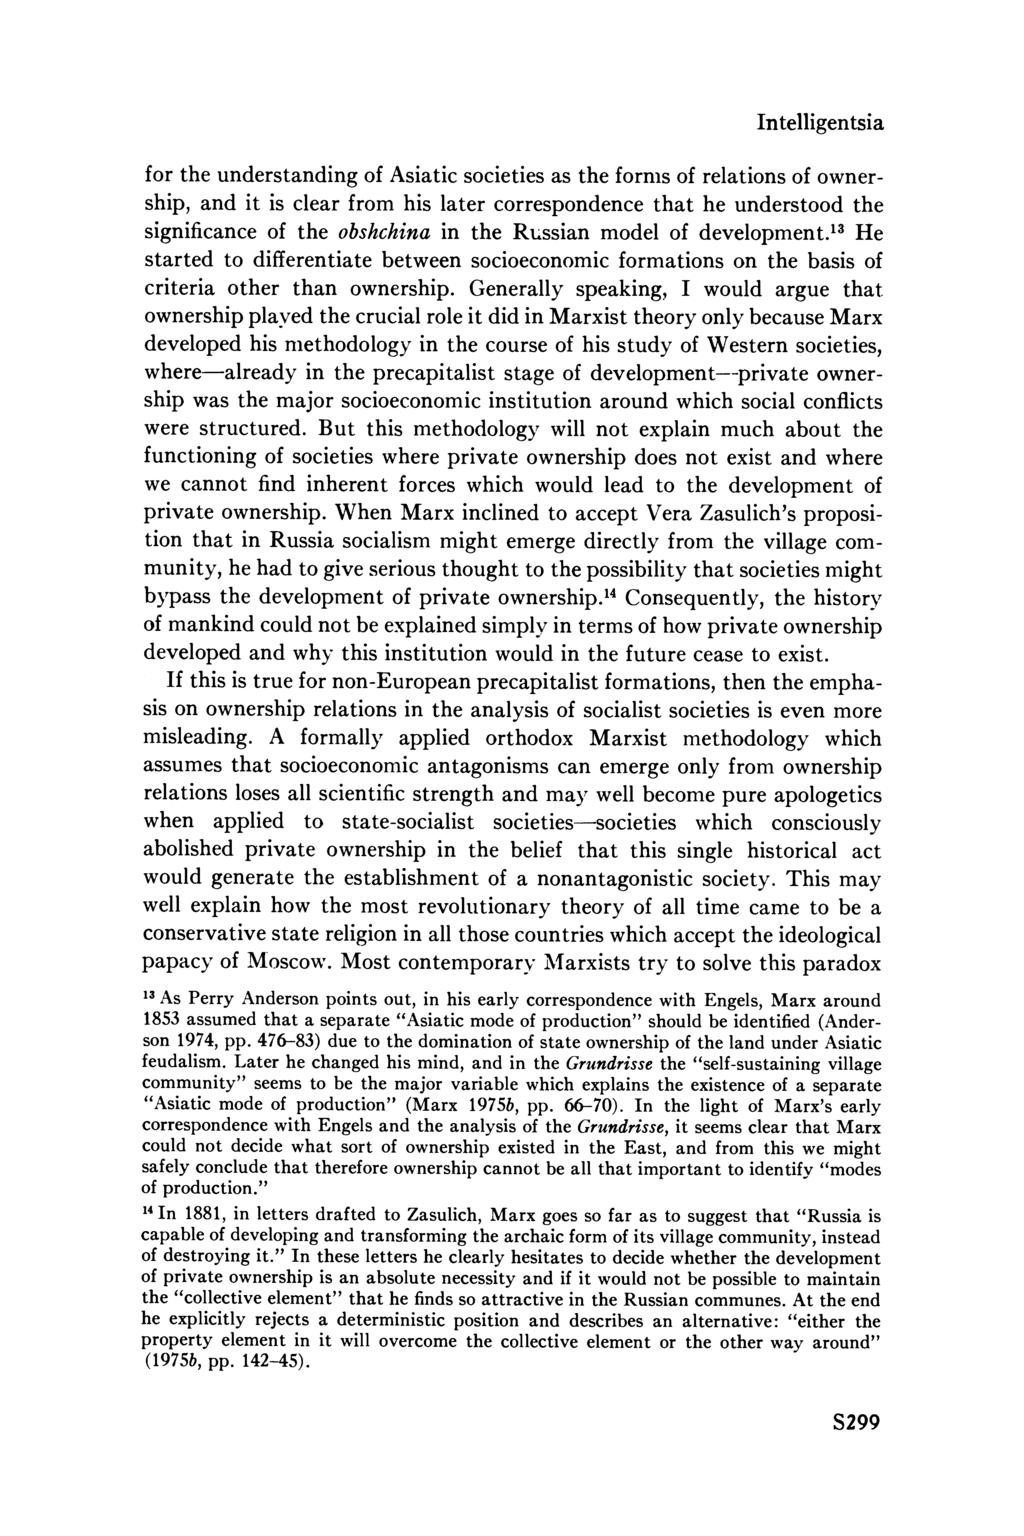 Intelligentsia for the understanding of Asiatic societies as the forms of relations of ownership, and it is clear from his later correspondence that he understood the significance of the obshchina in